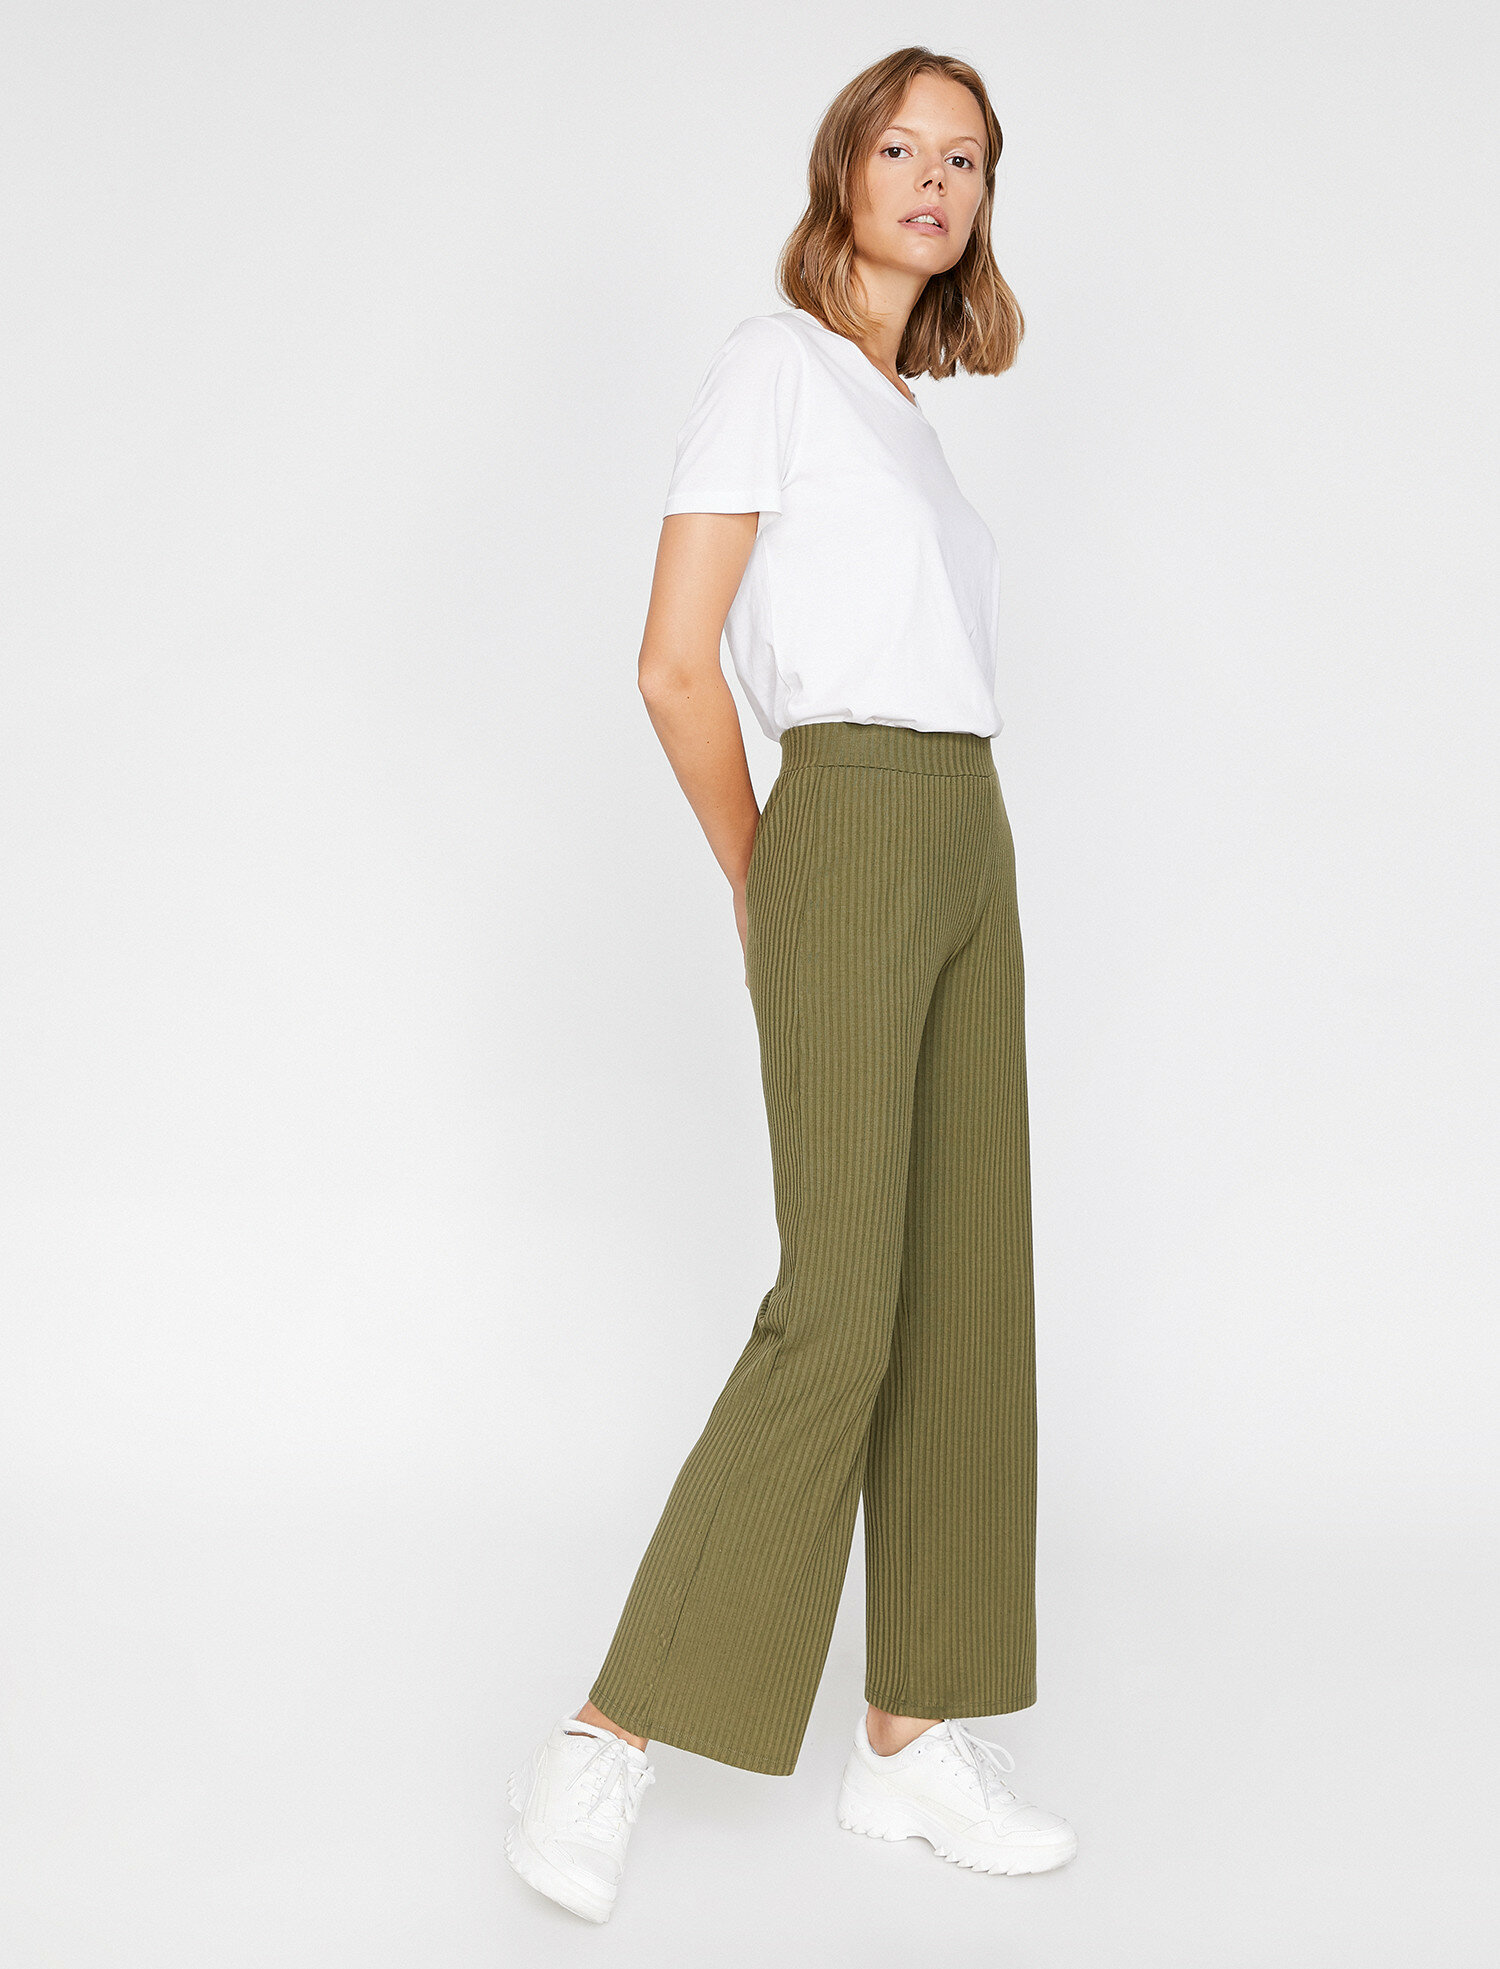 women's/ladies fashion trousers clothing manufacturer private label